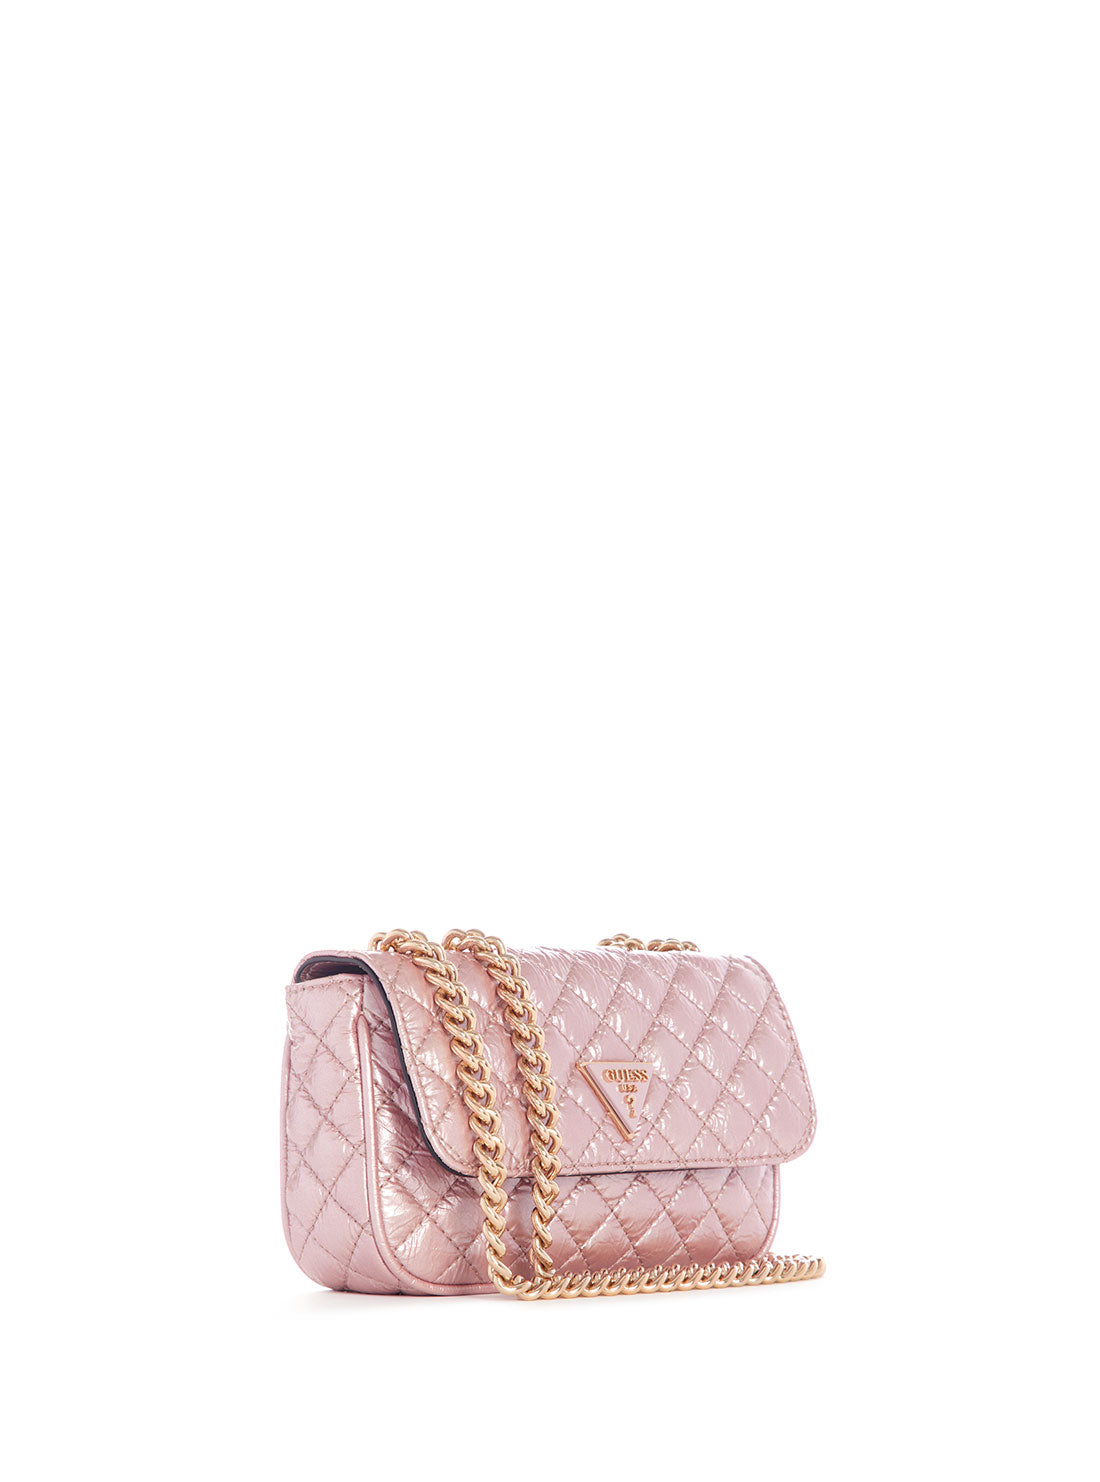 GUESS Women's Rose Spark Quilted Mini Crossbody Bag QH870078 Front Side View